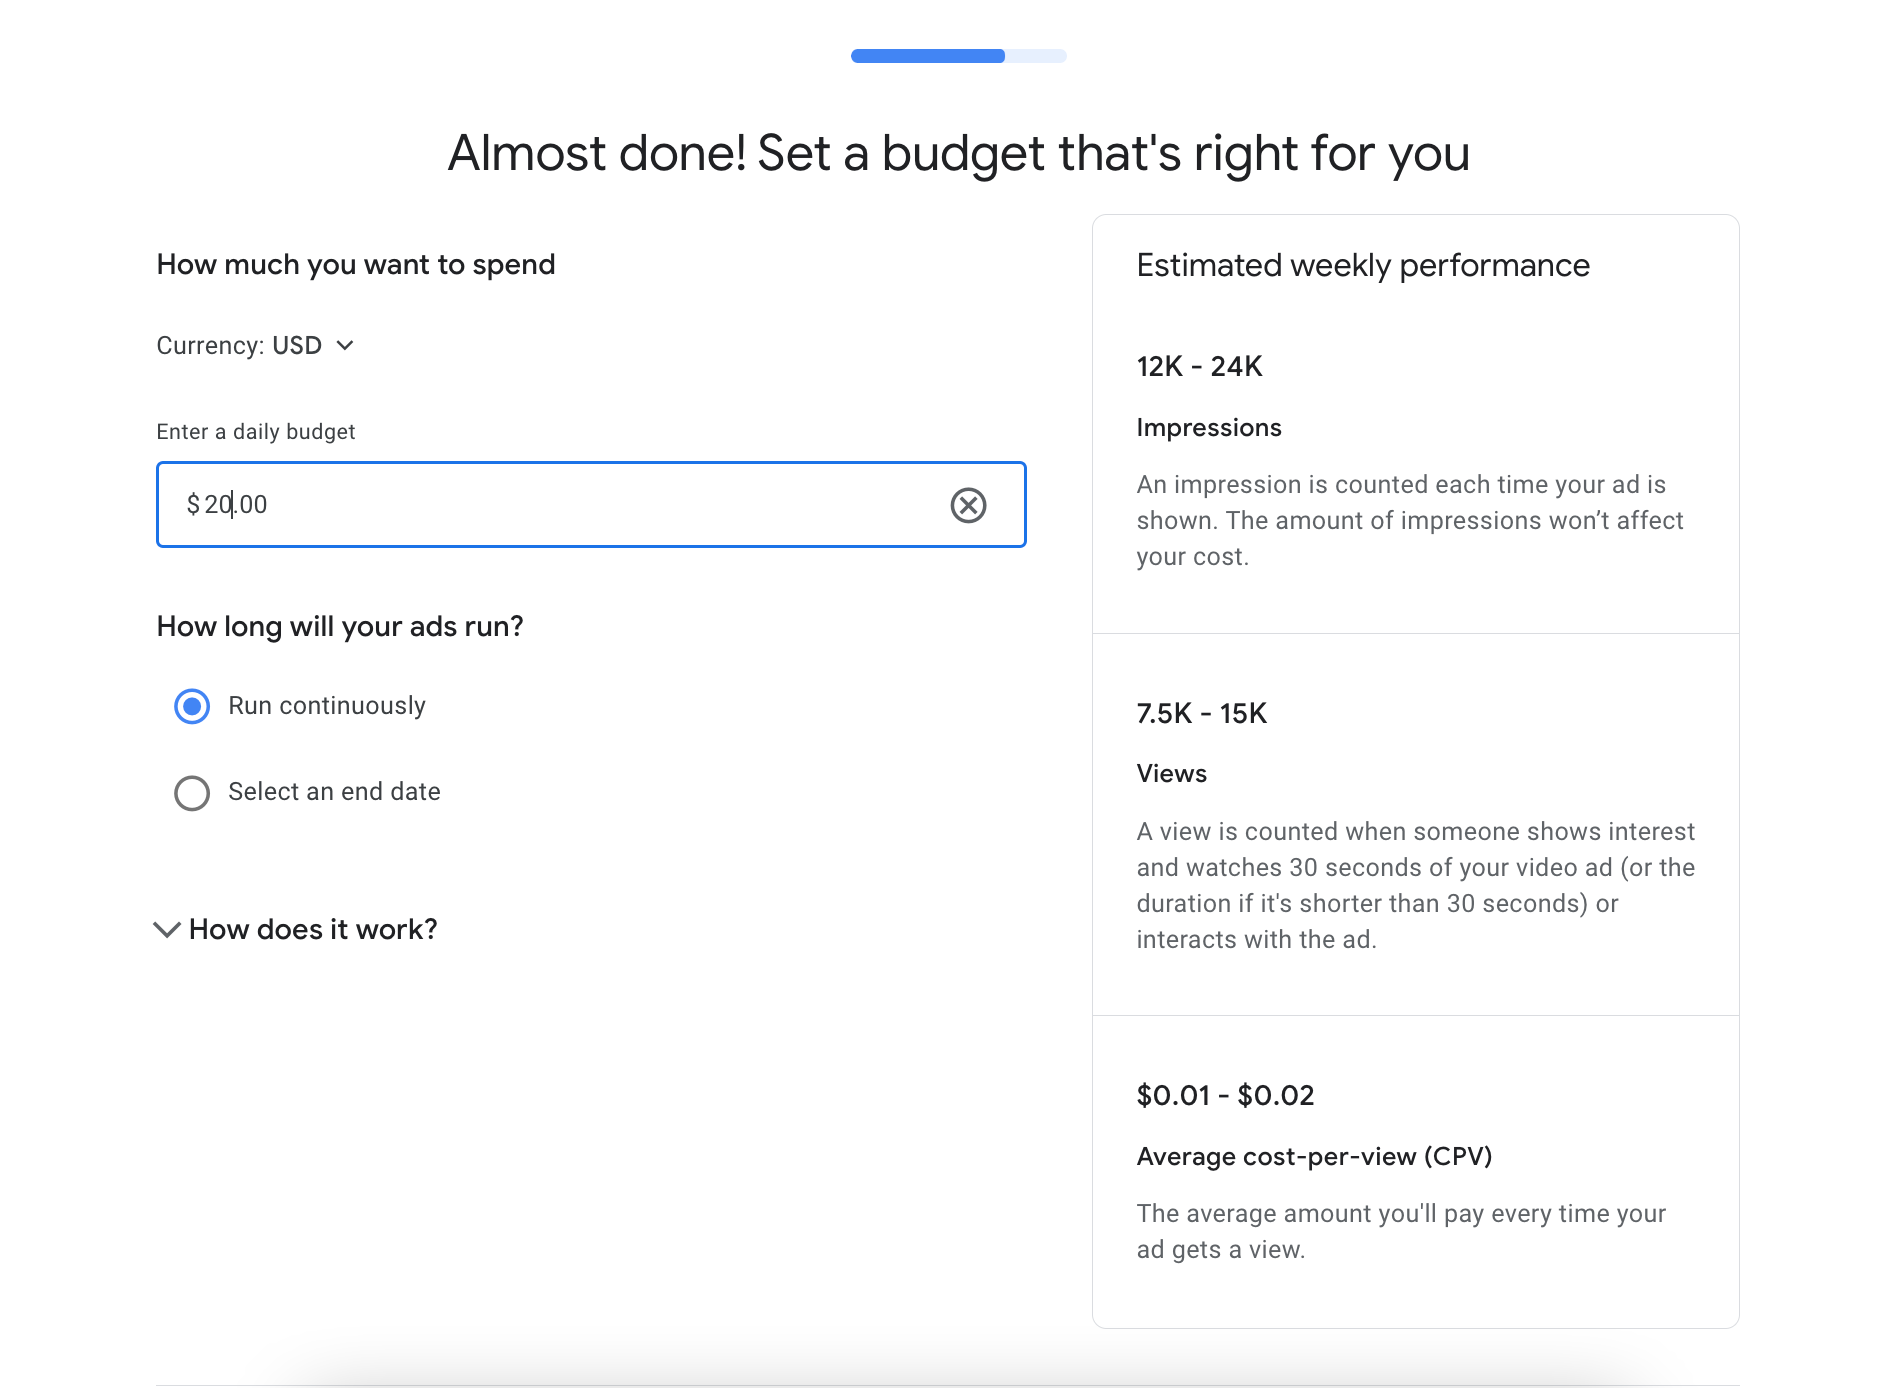 Set a budget for your YouTube ad